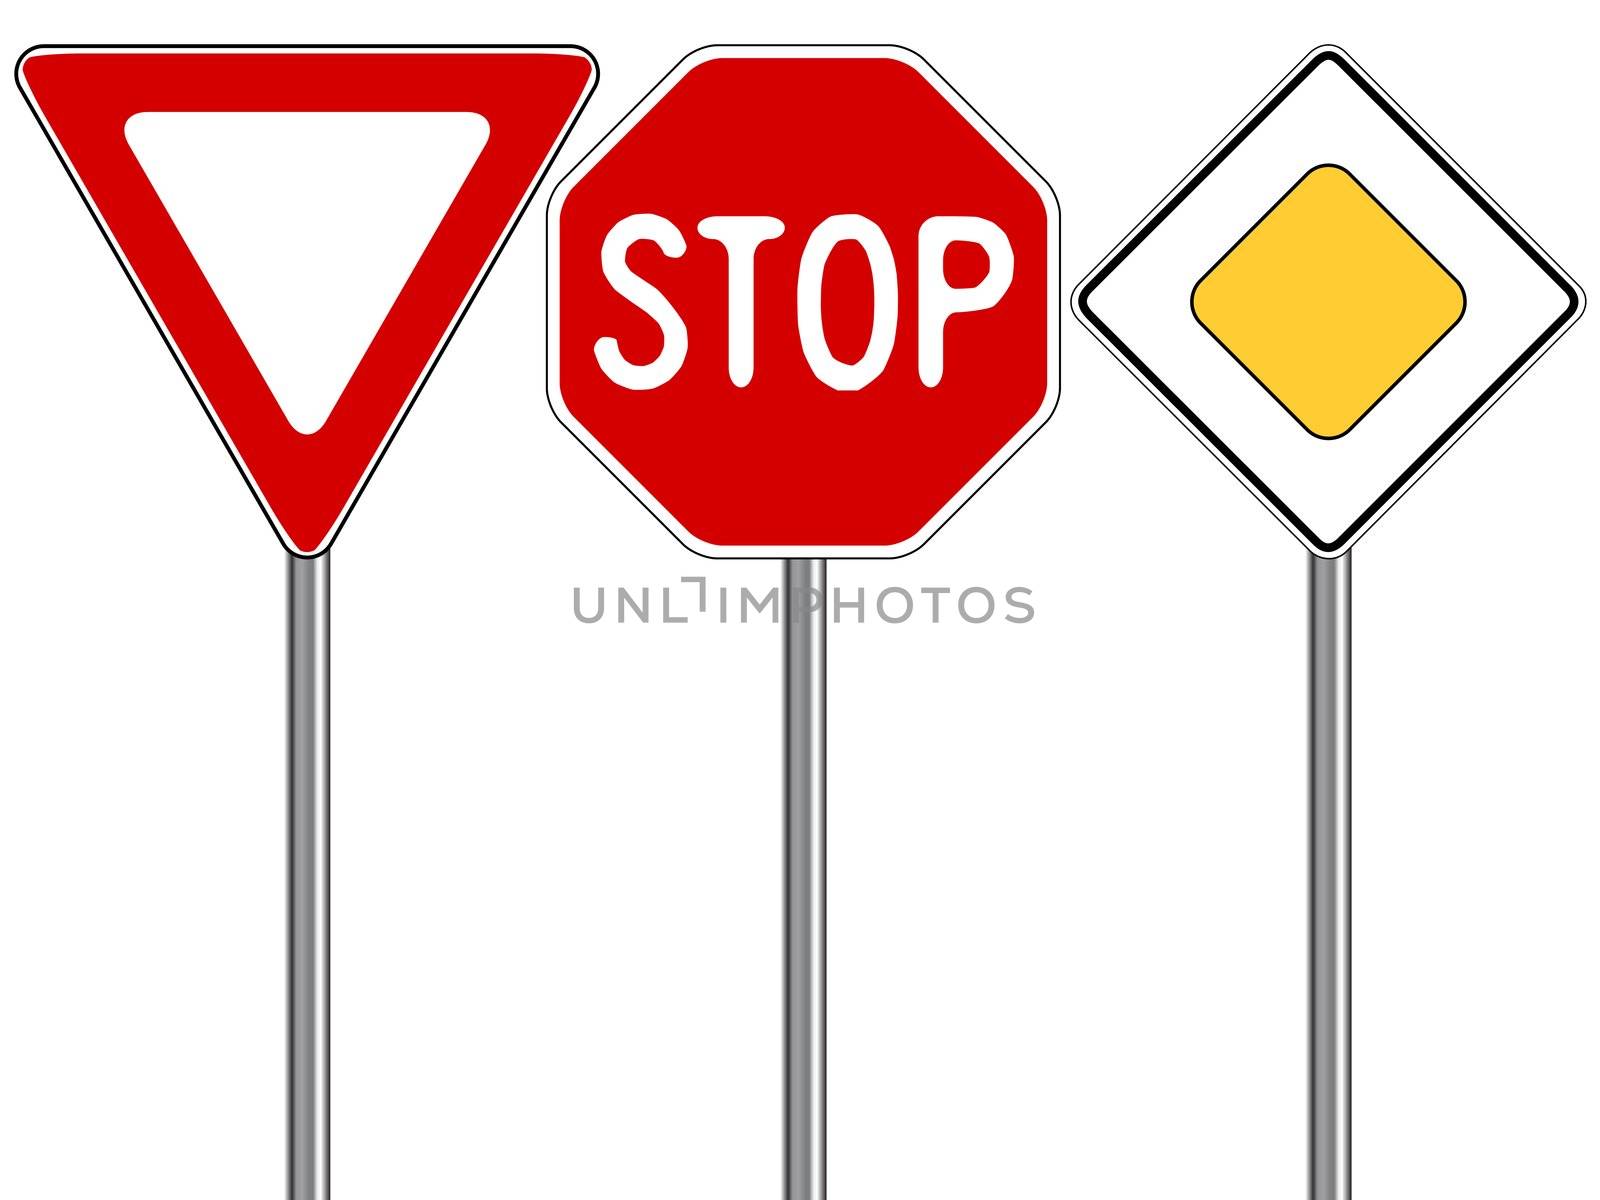 traffic signs against white background, abstract vector art illustration